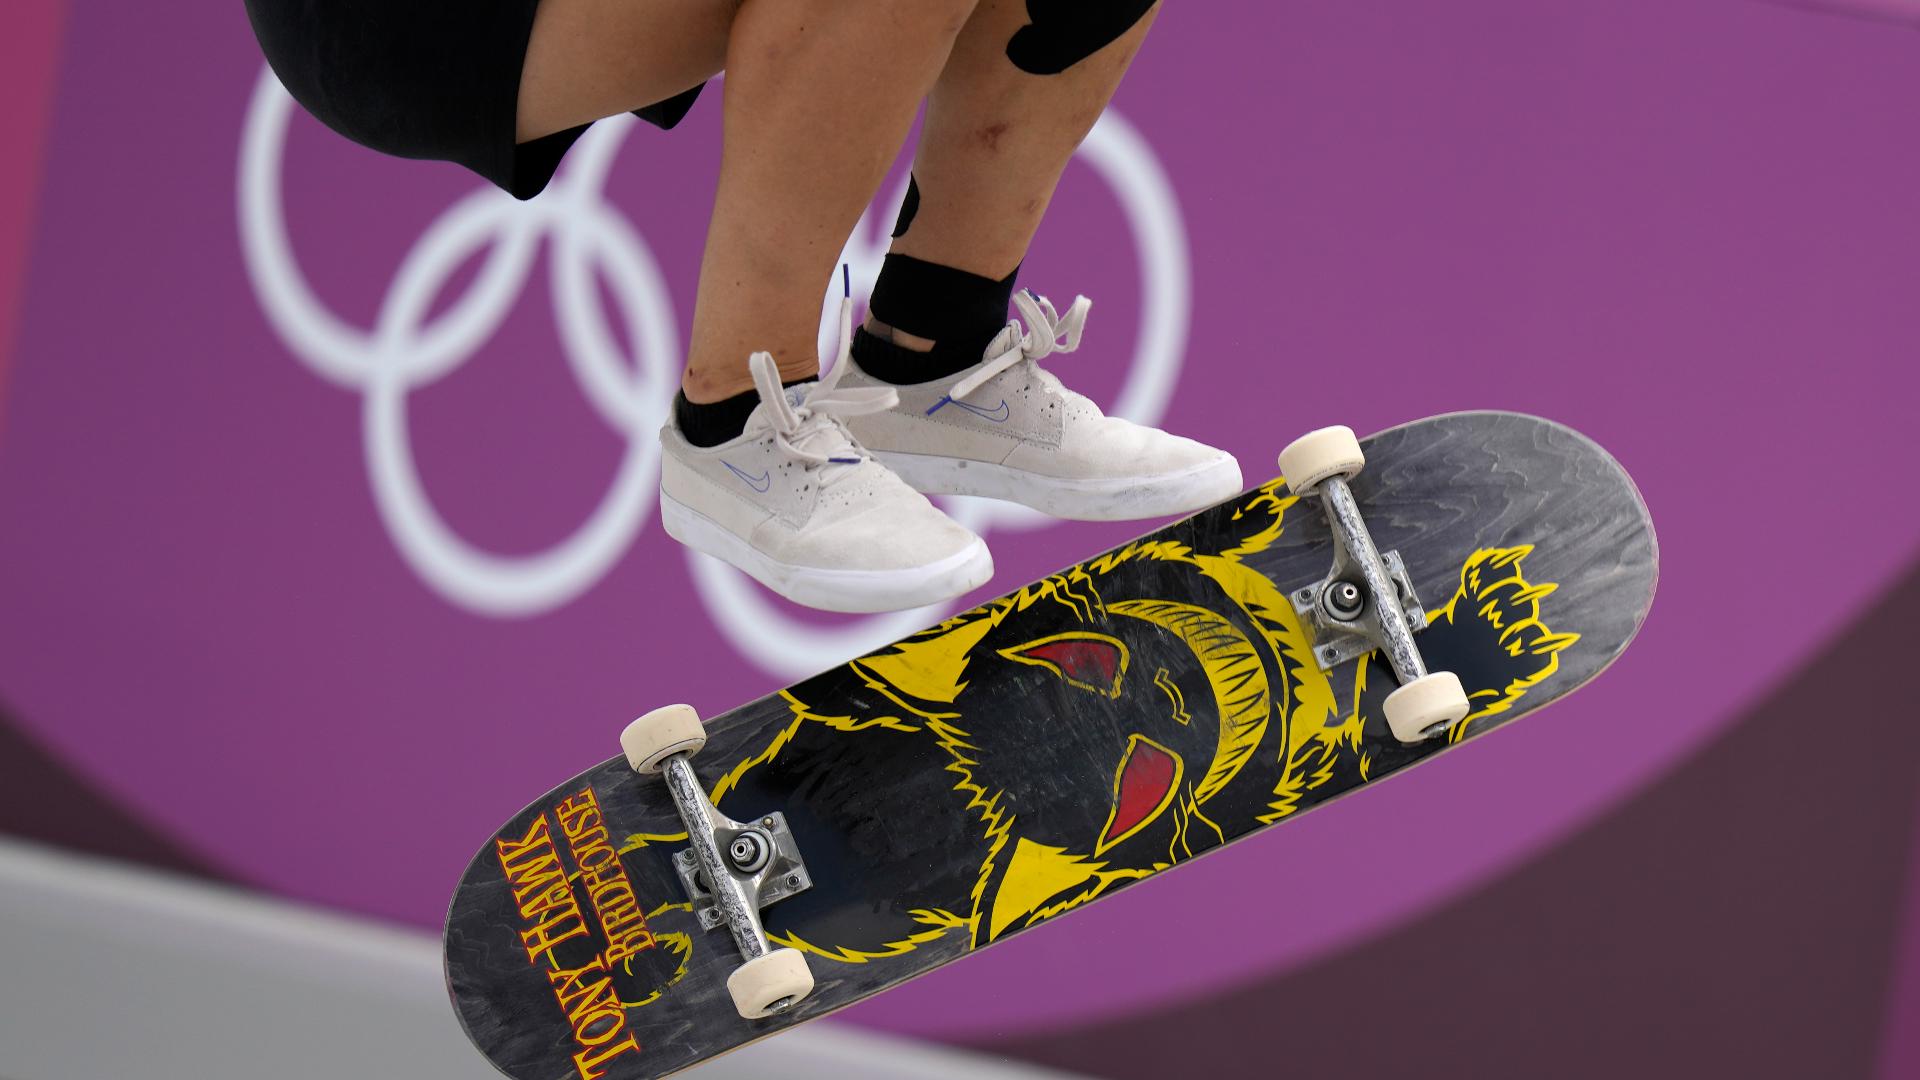 After making its debut at the last Summer Olympics, skateboarding is back for the Paris Games.